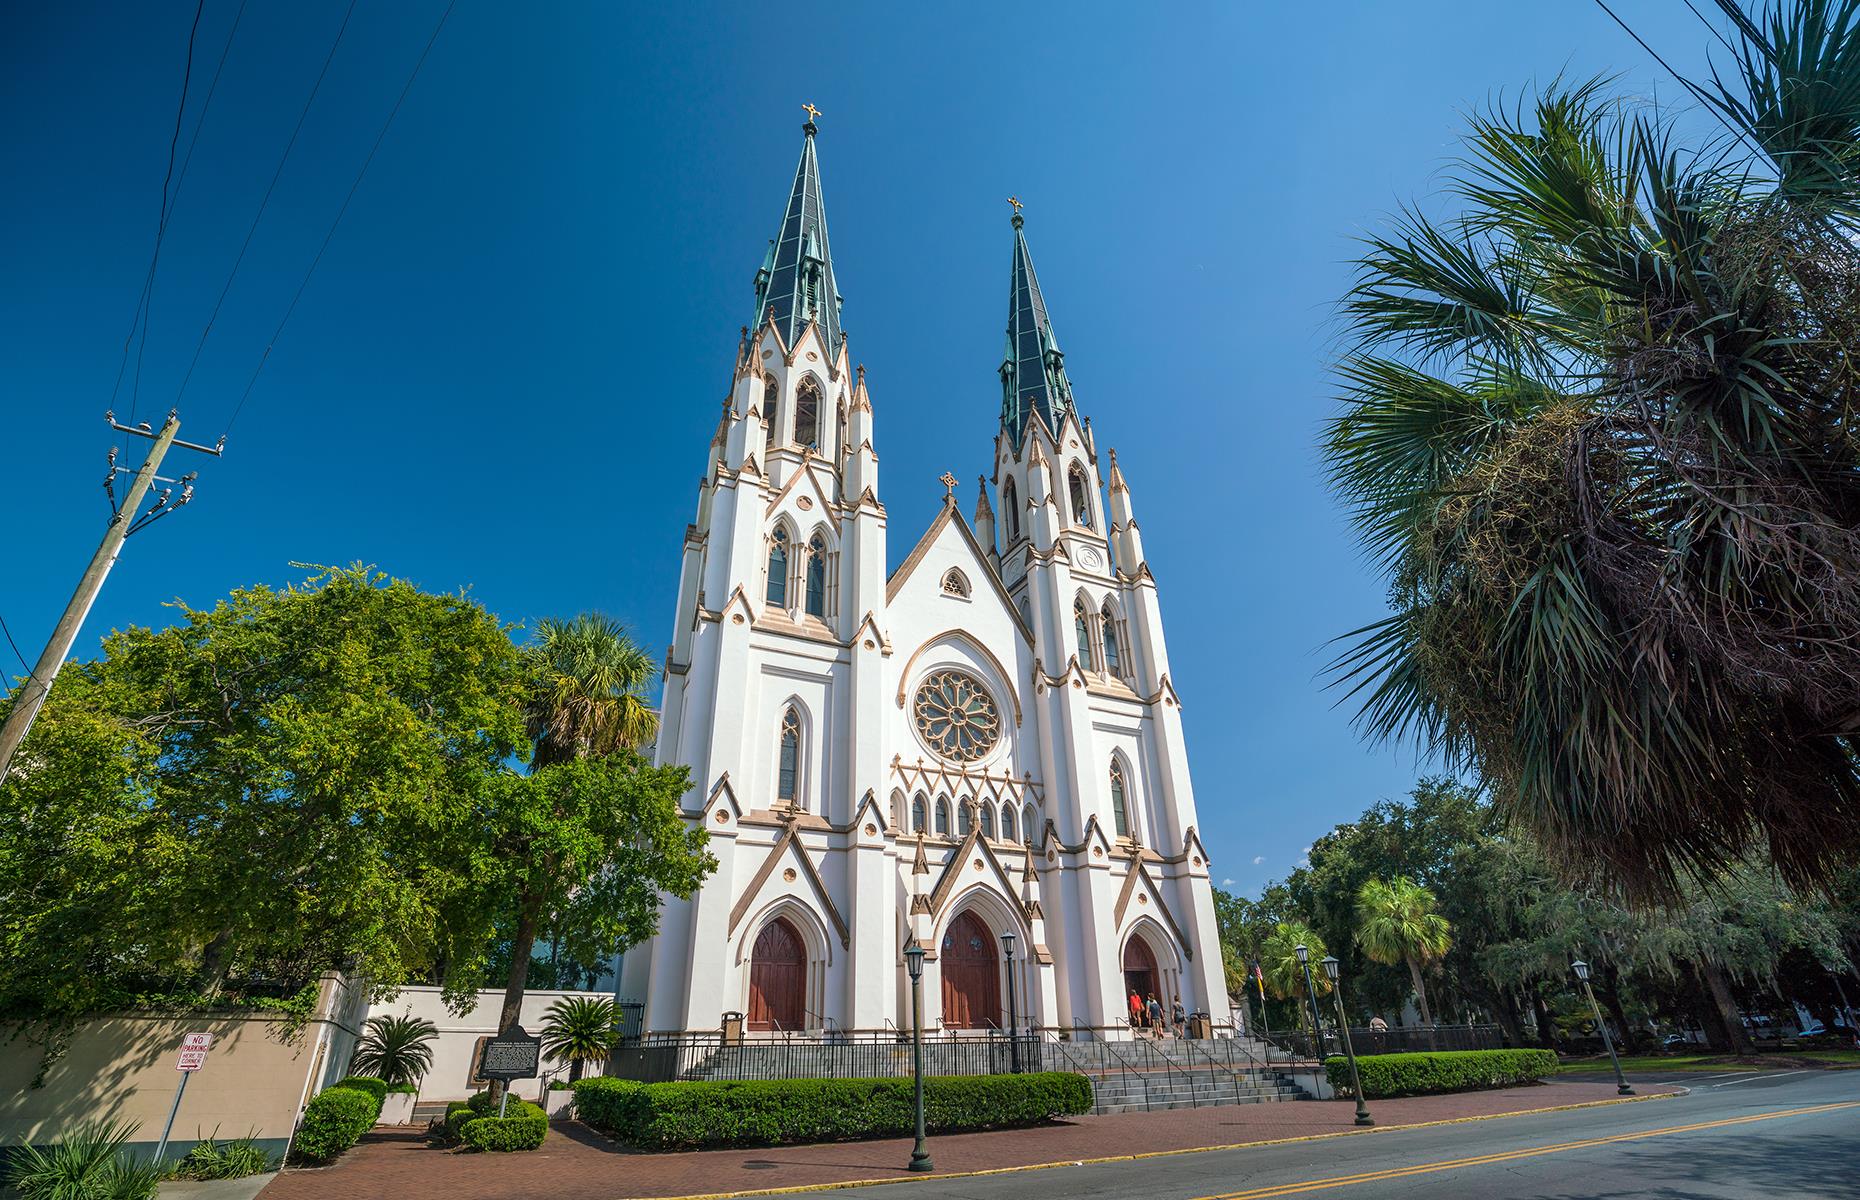 <p>This cathedral in Savannah has a striking Gothic facade that's hard to miss. It was built in 1873 and its exterior is adorned with intricate carvings, statues and stained glass. On the inside, soaring vaulted ceilings and a great pipe organ awe most visitors. </p>  <p><a href="https://www.loveexploring.com/gallerylist/158262/ranked-georgias-most-charming-small-towns"><strong>These are Georgia's most charming small towns</strong></a></p>